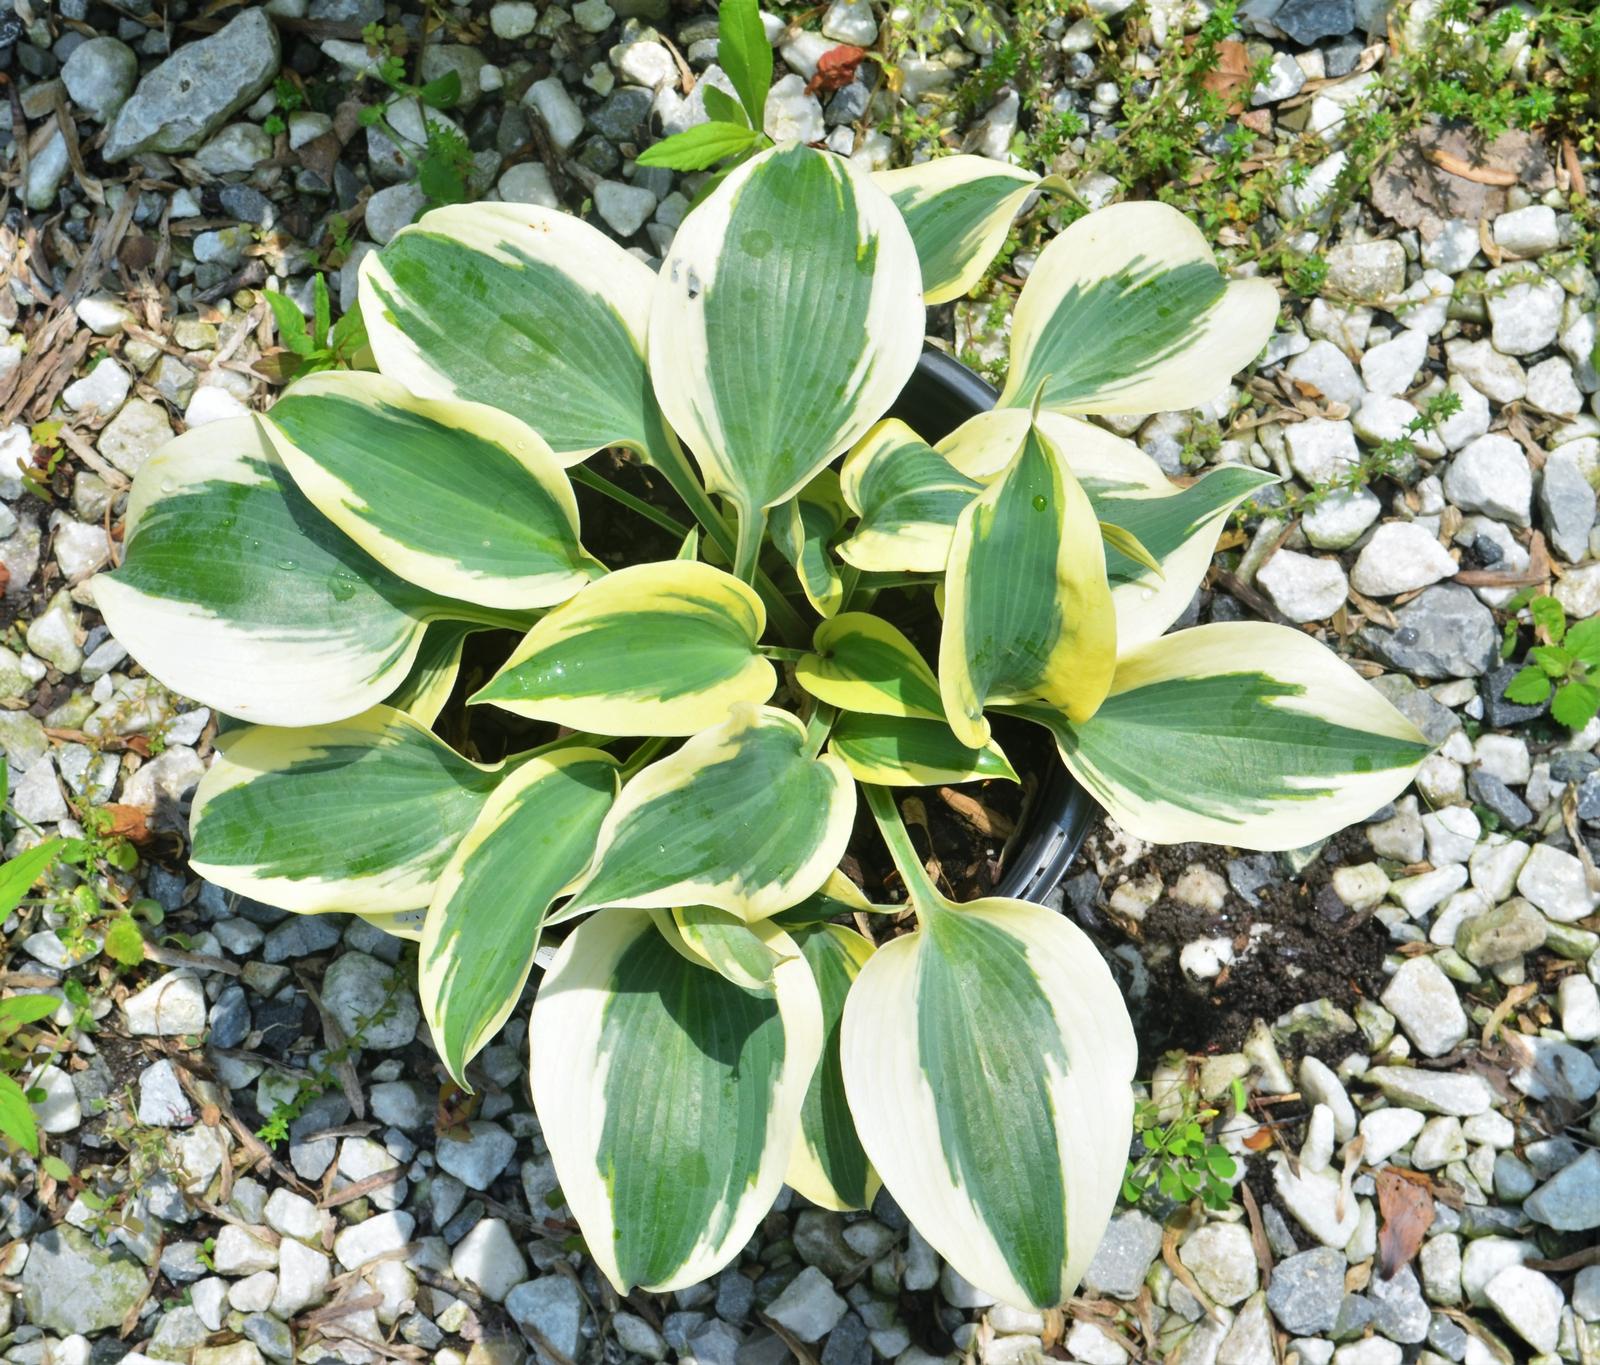 Hosta 'Autumn Frost' - Plantain Lily from Hillcrest Nursery